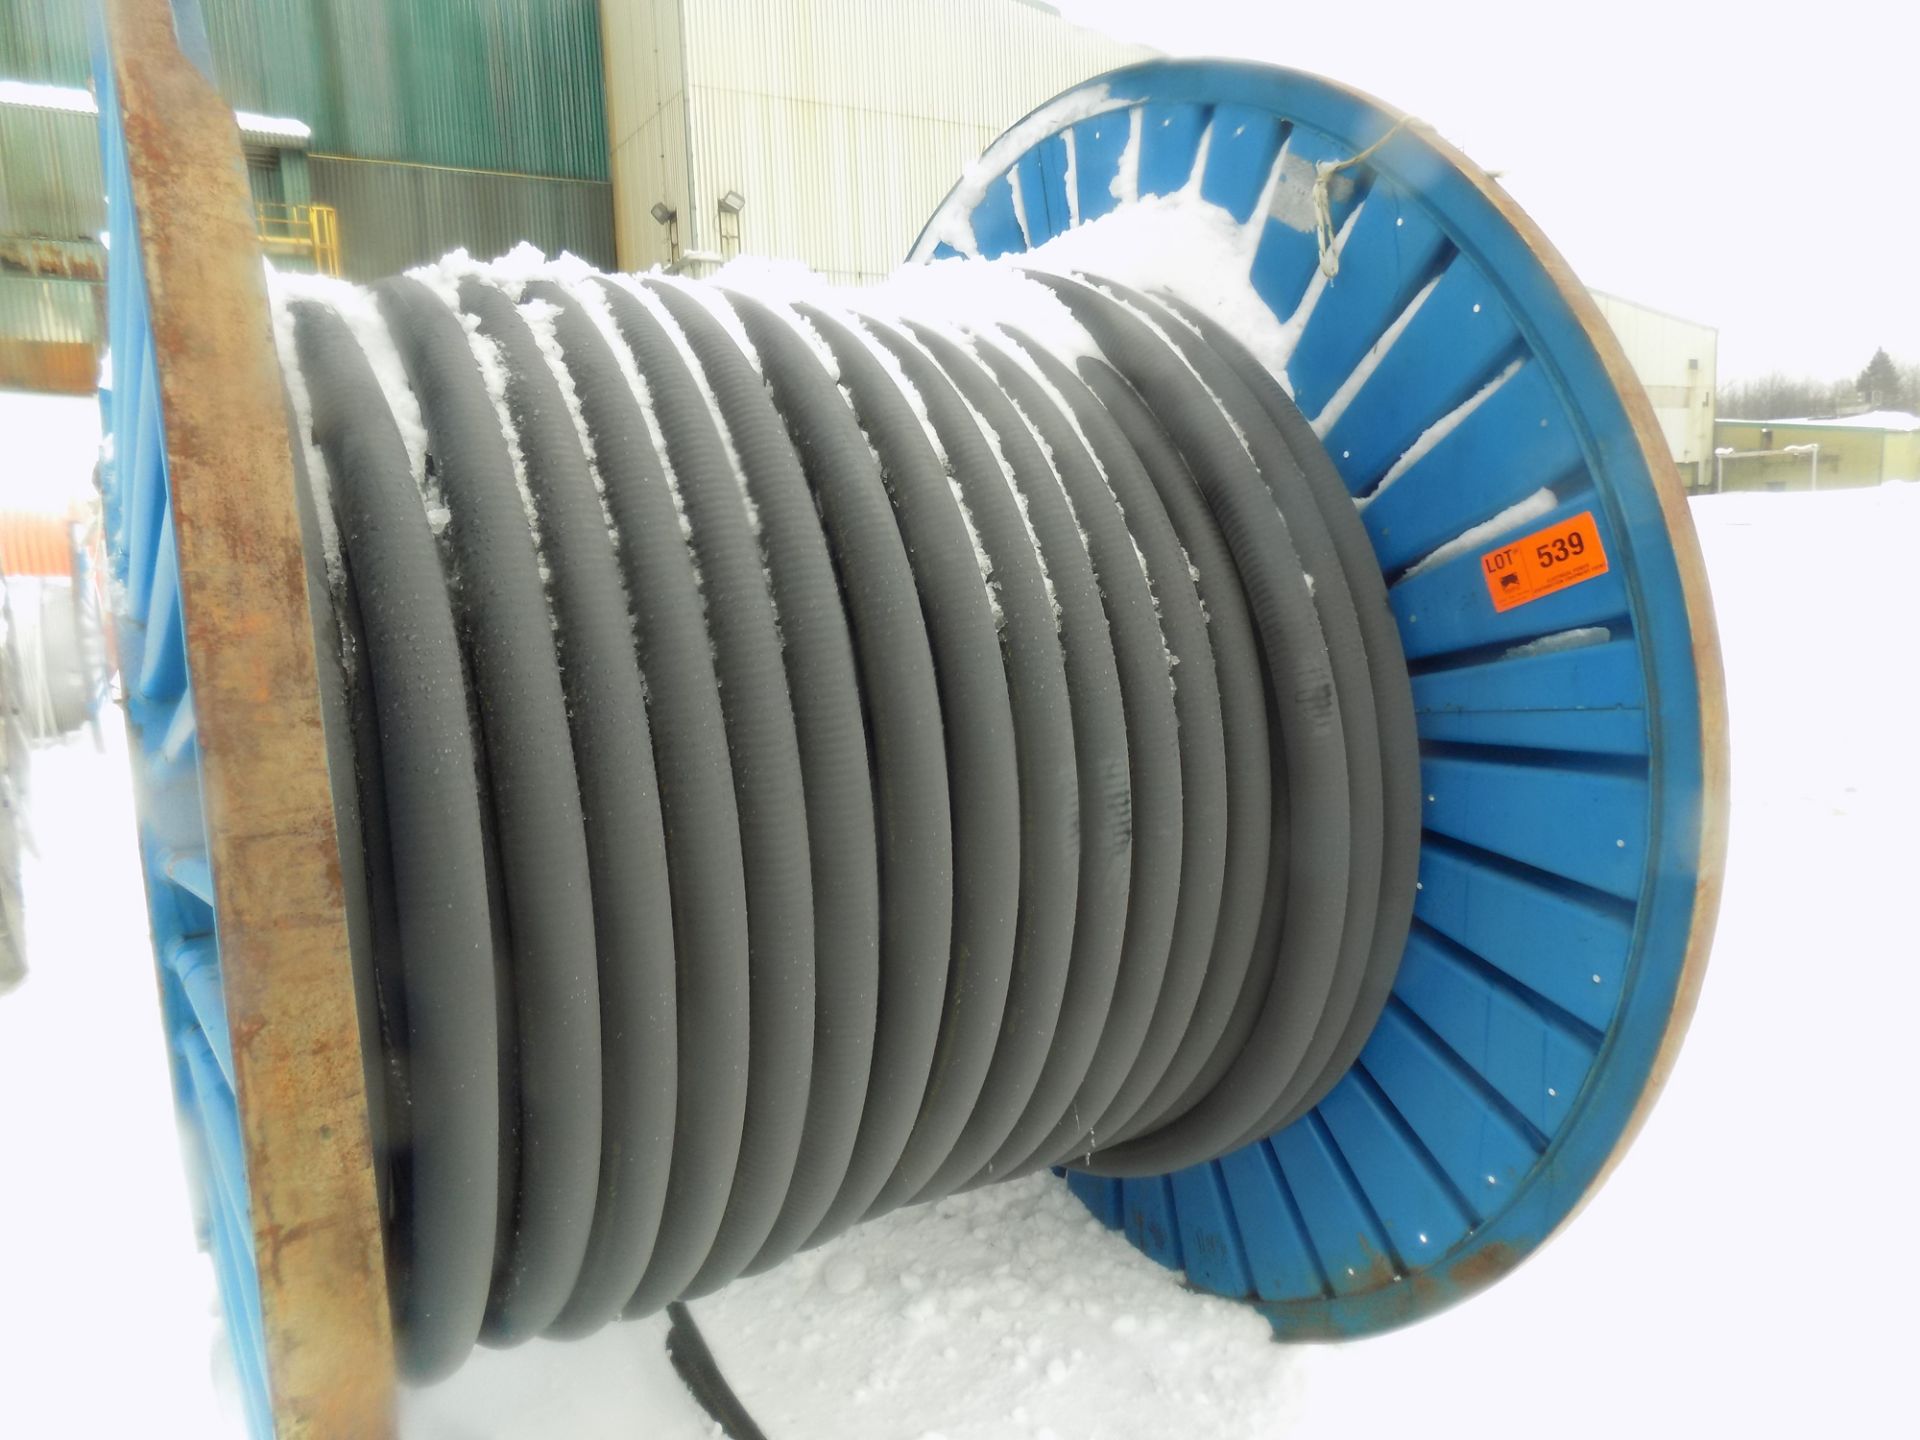 LOT/ GENERAL CABLE 1/0-3+6G 35KV 100% HVTECK INSULATED HIGH VOLTAGE POWER CABLE, WITH STEEL REEL (